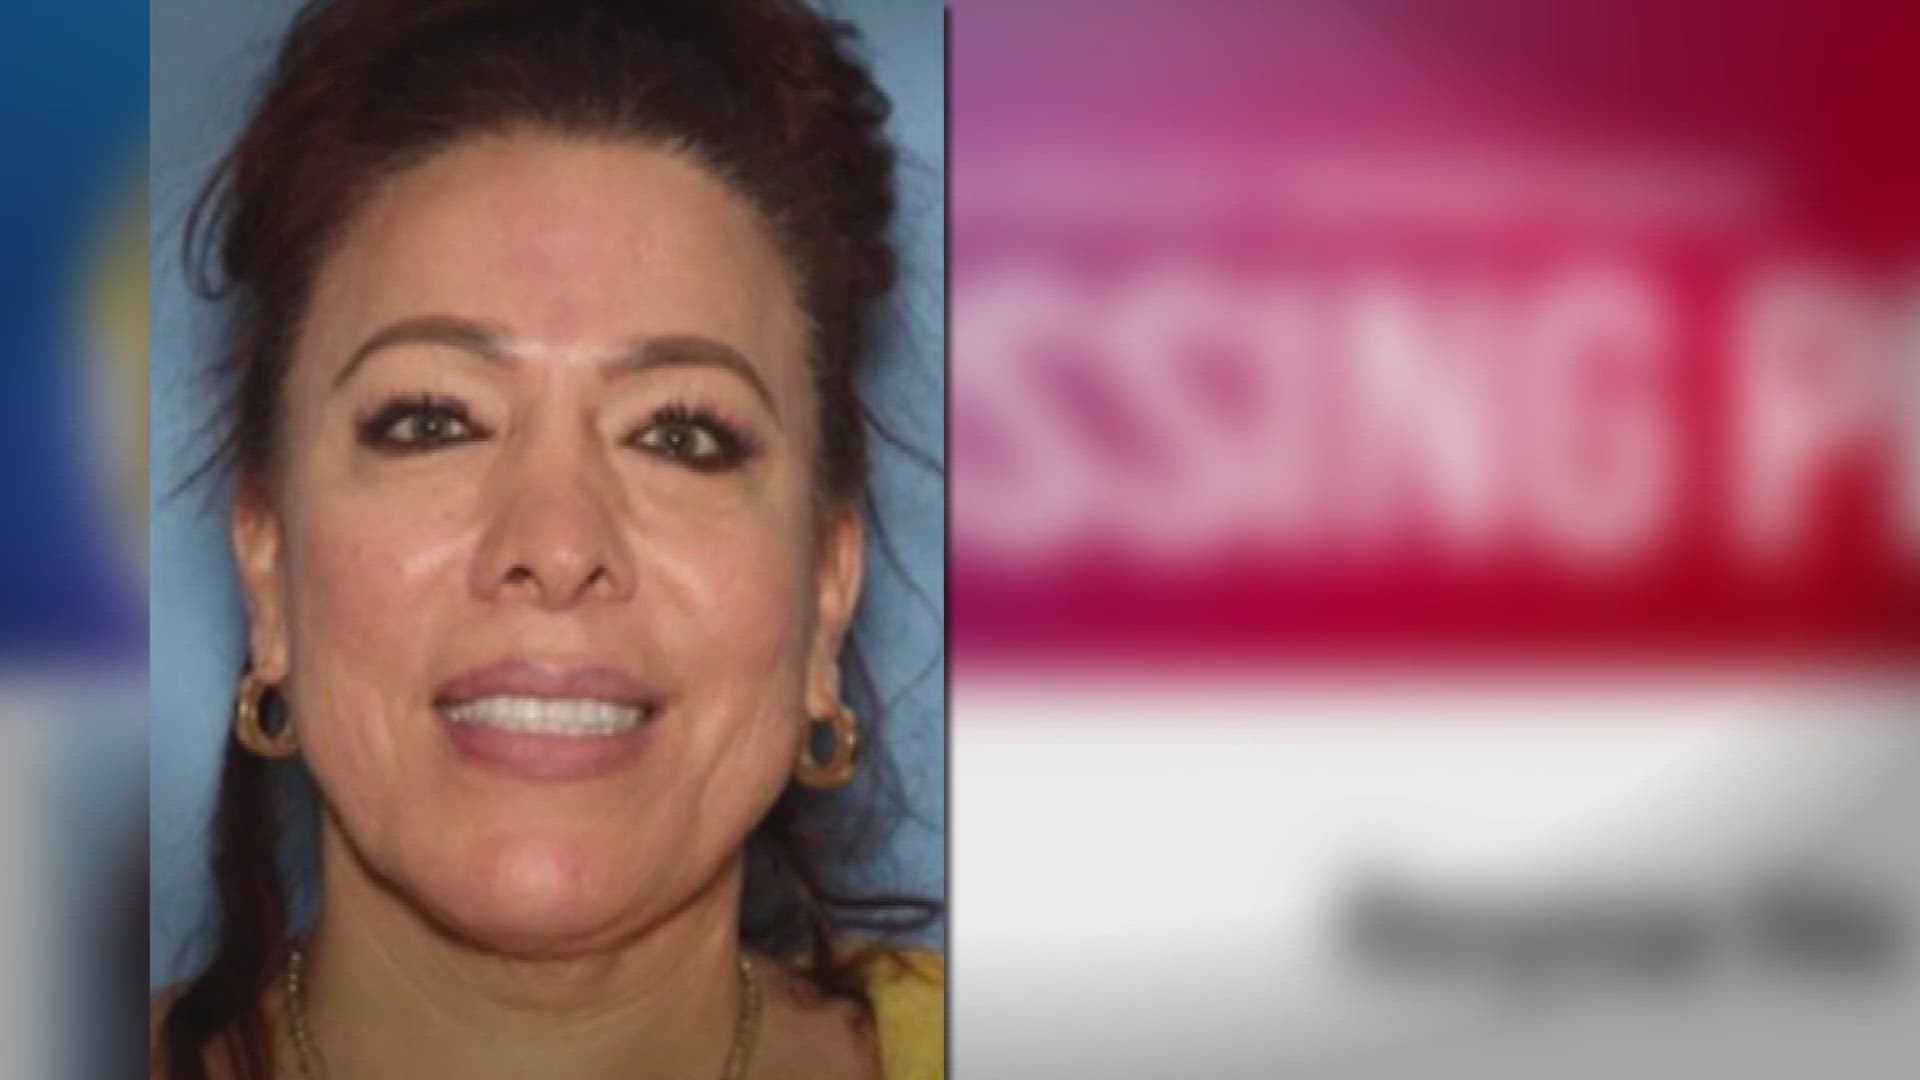 Reyna Hernandez, a small business owner in Renton, has not shown up for work or been seen by family and friends since Feb. 26.